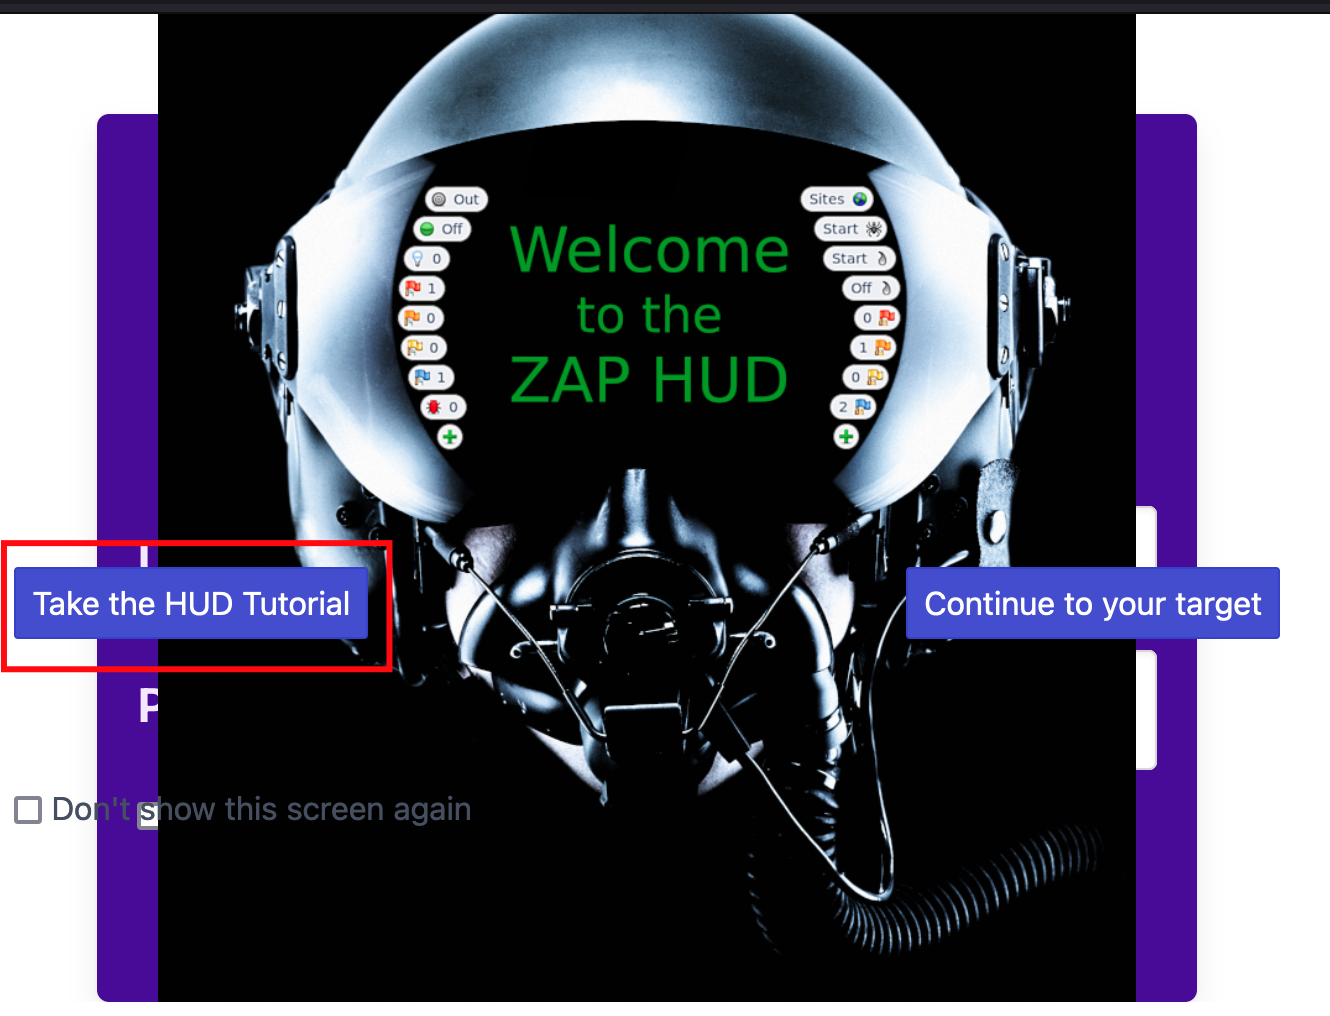 HUD splash screen in the browser with the Take the HUD Tutorial button highlighted.